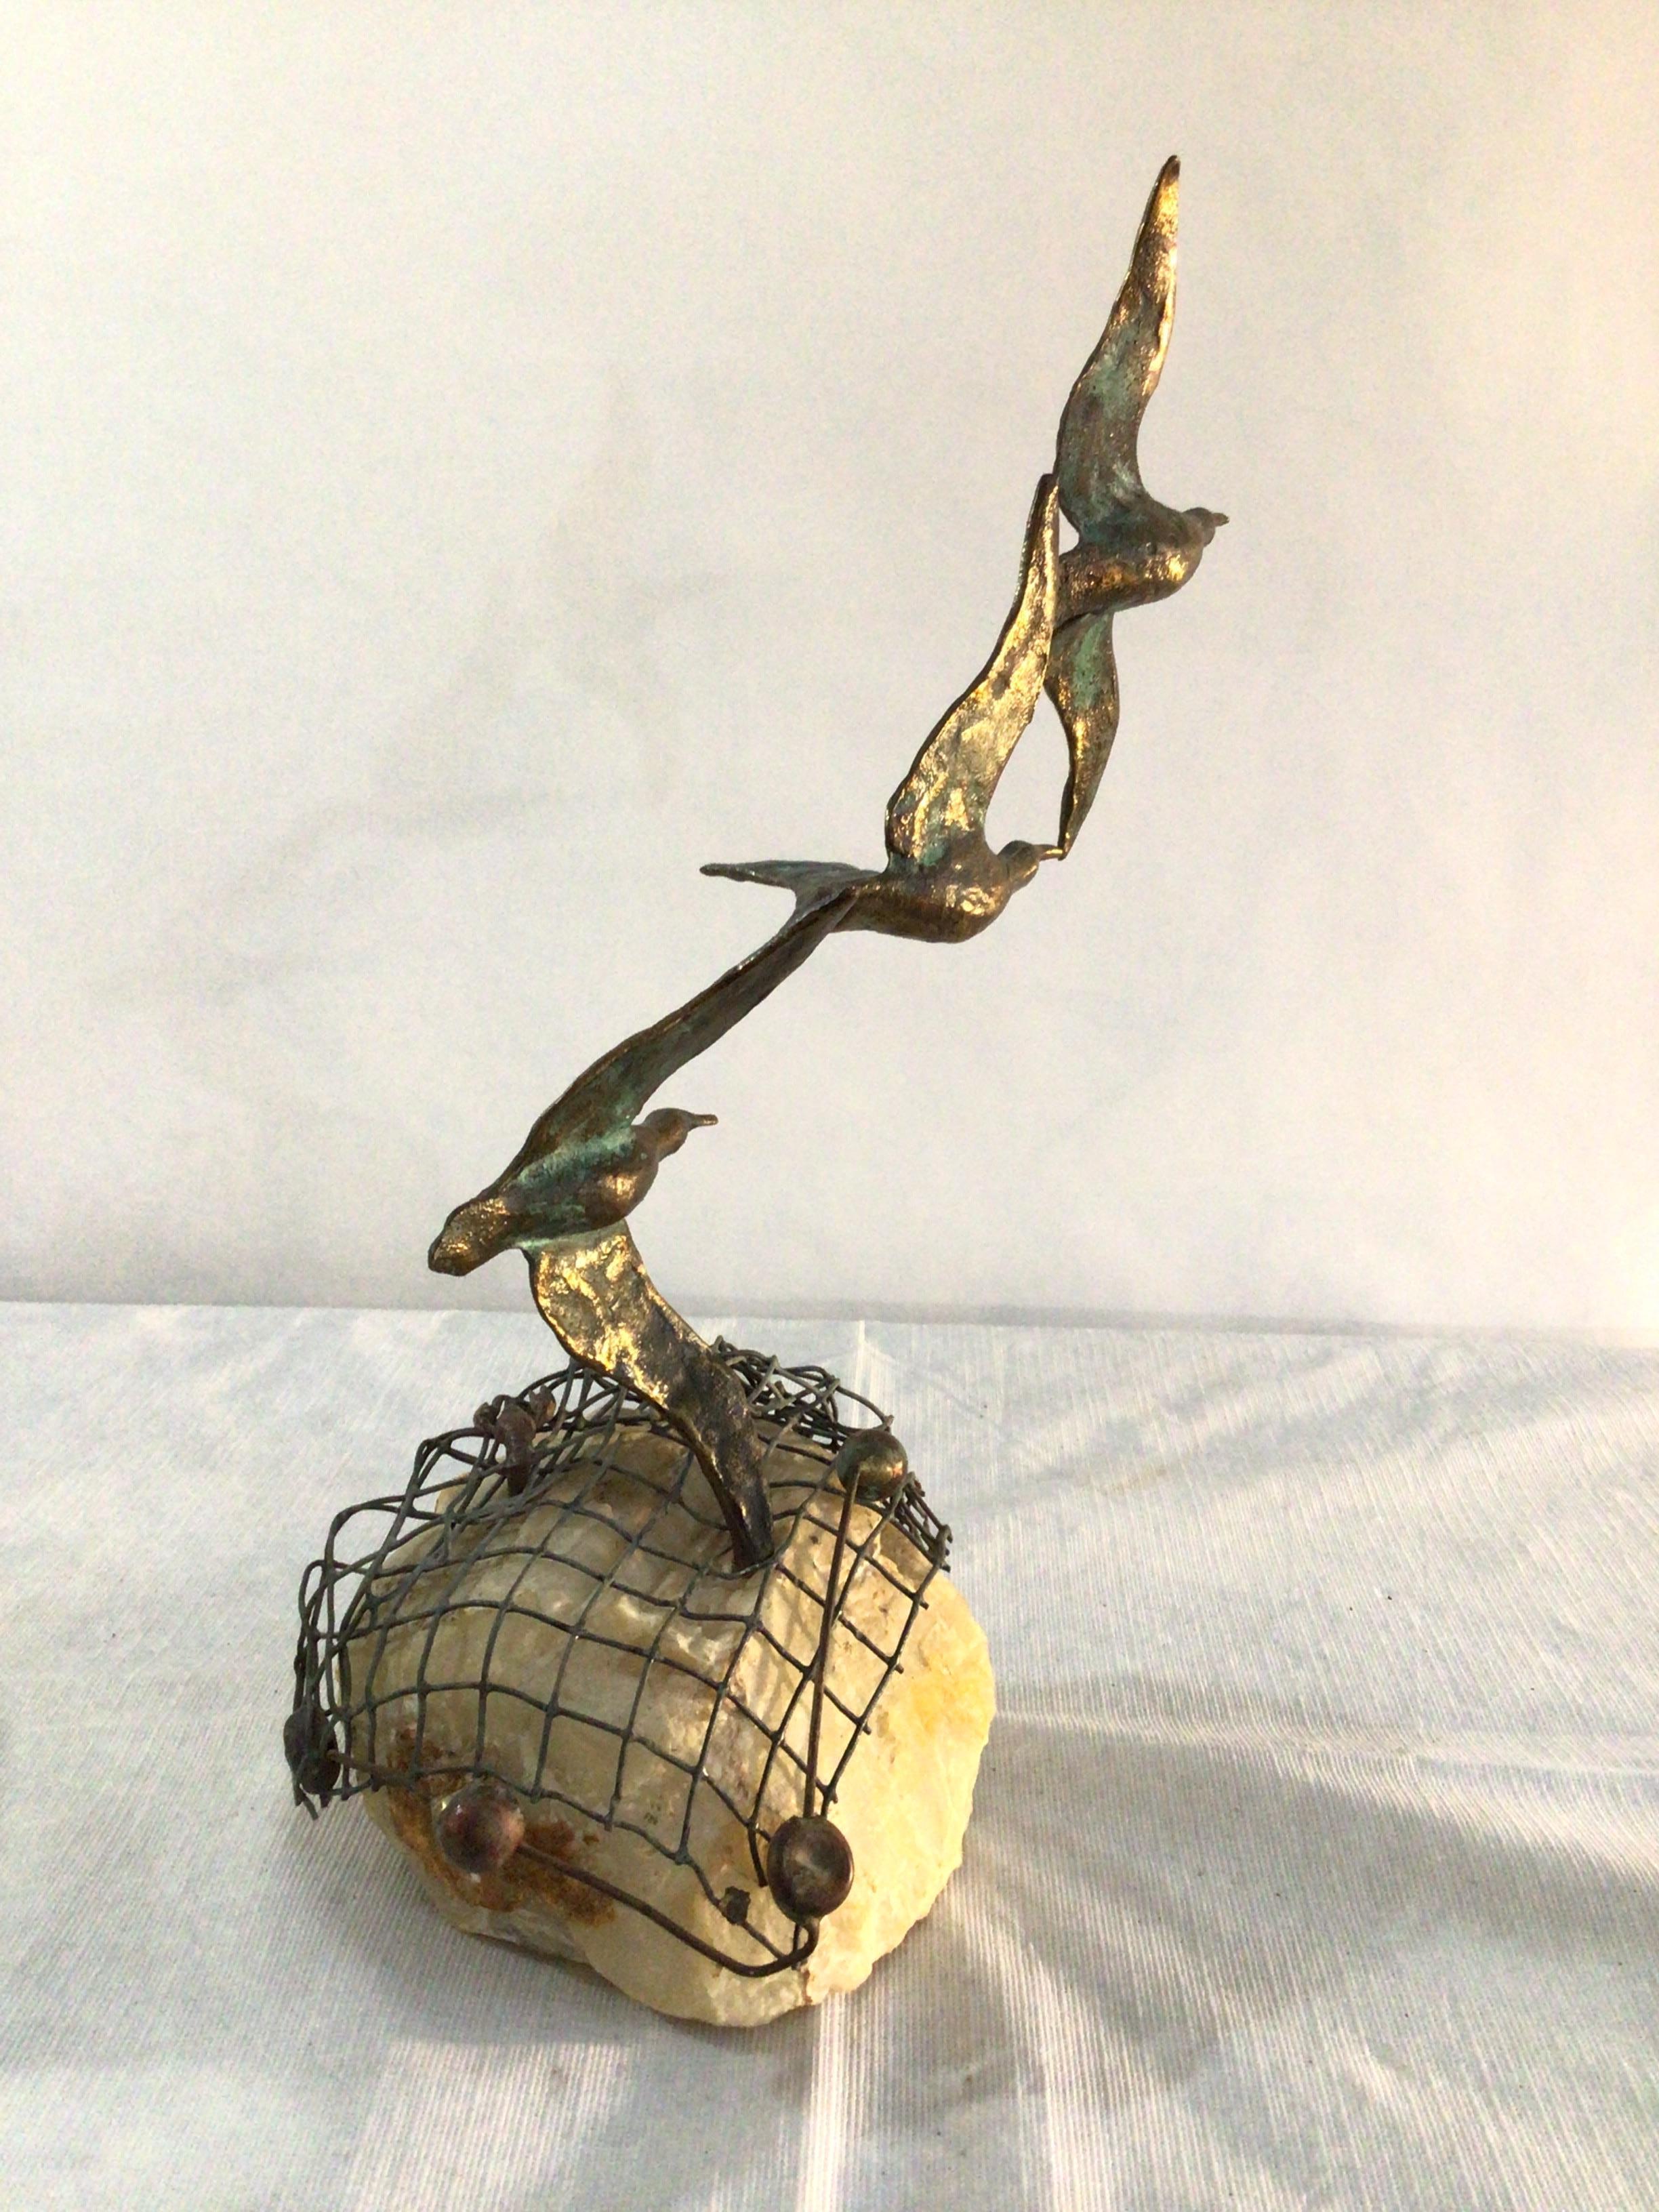 1960s Curtis Jere 3 Birds In Flight Sculpture On Stone Base with Label
Lobster shown on wire net that completes the nautical sculpture